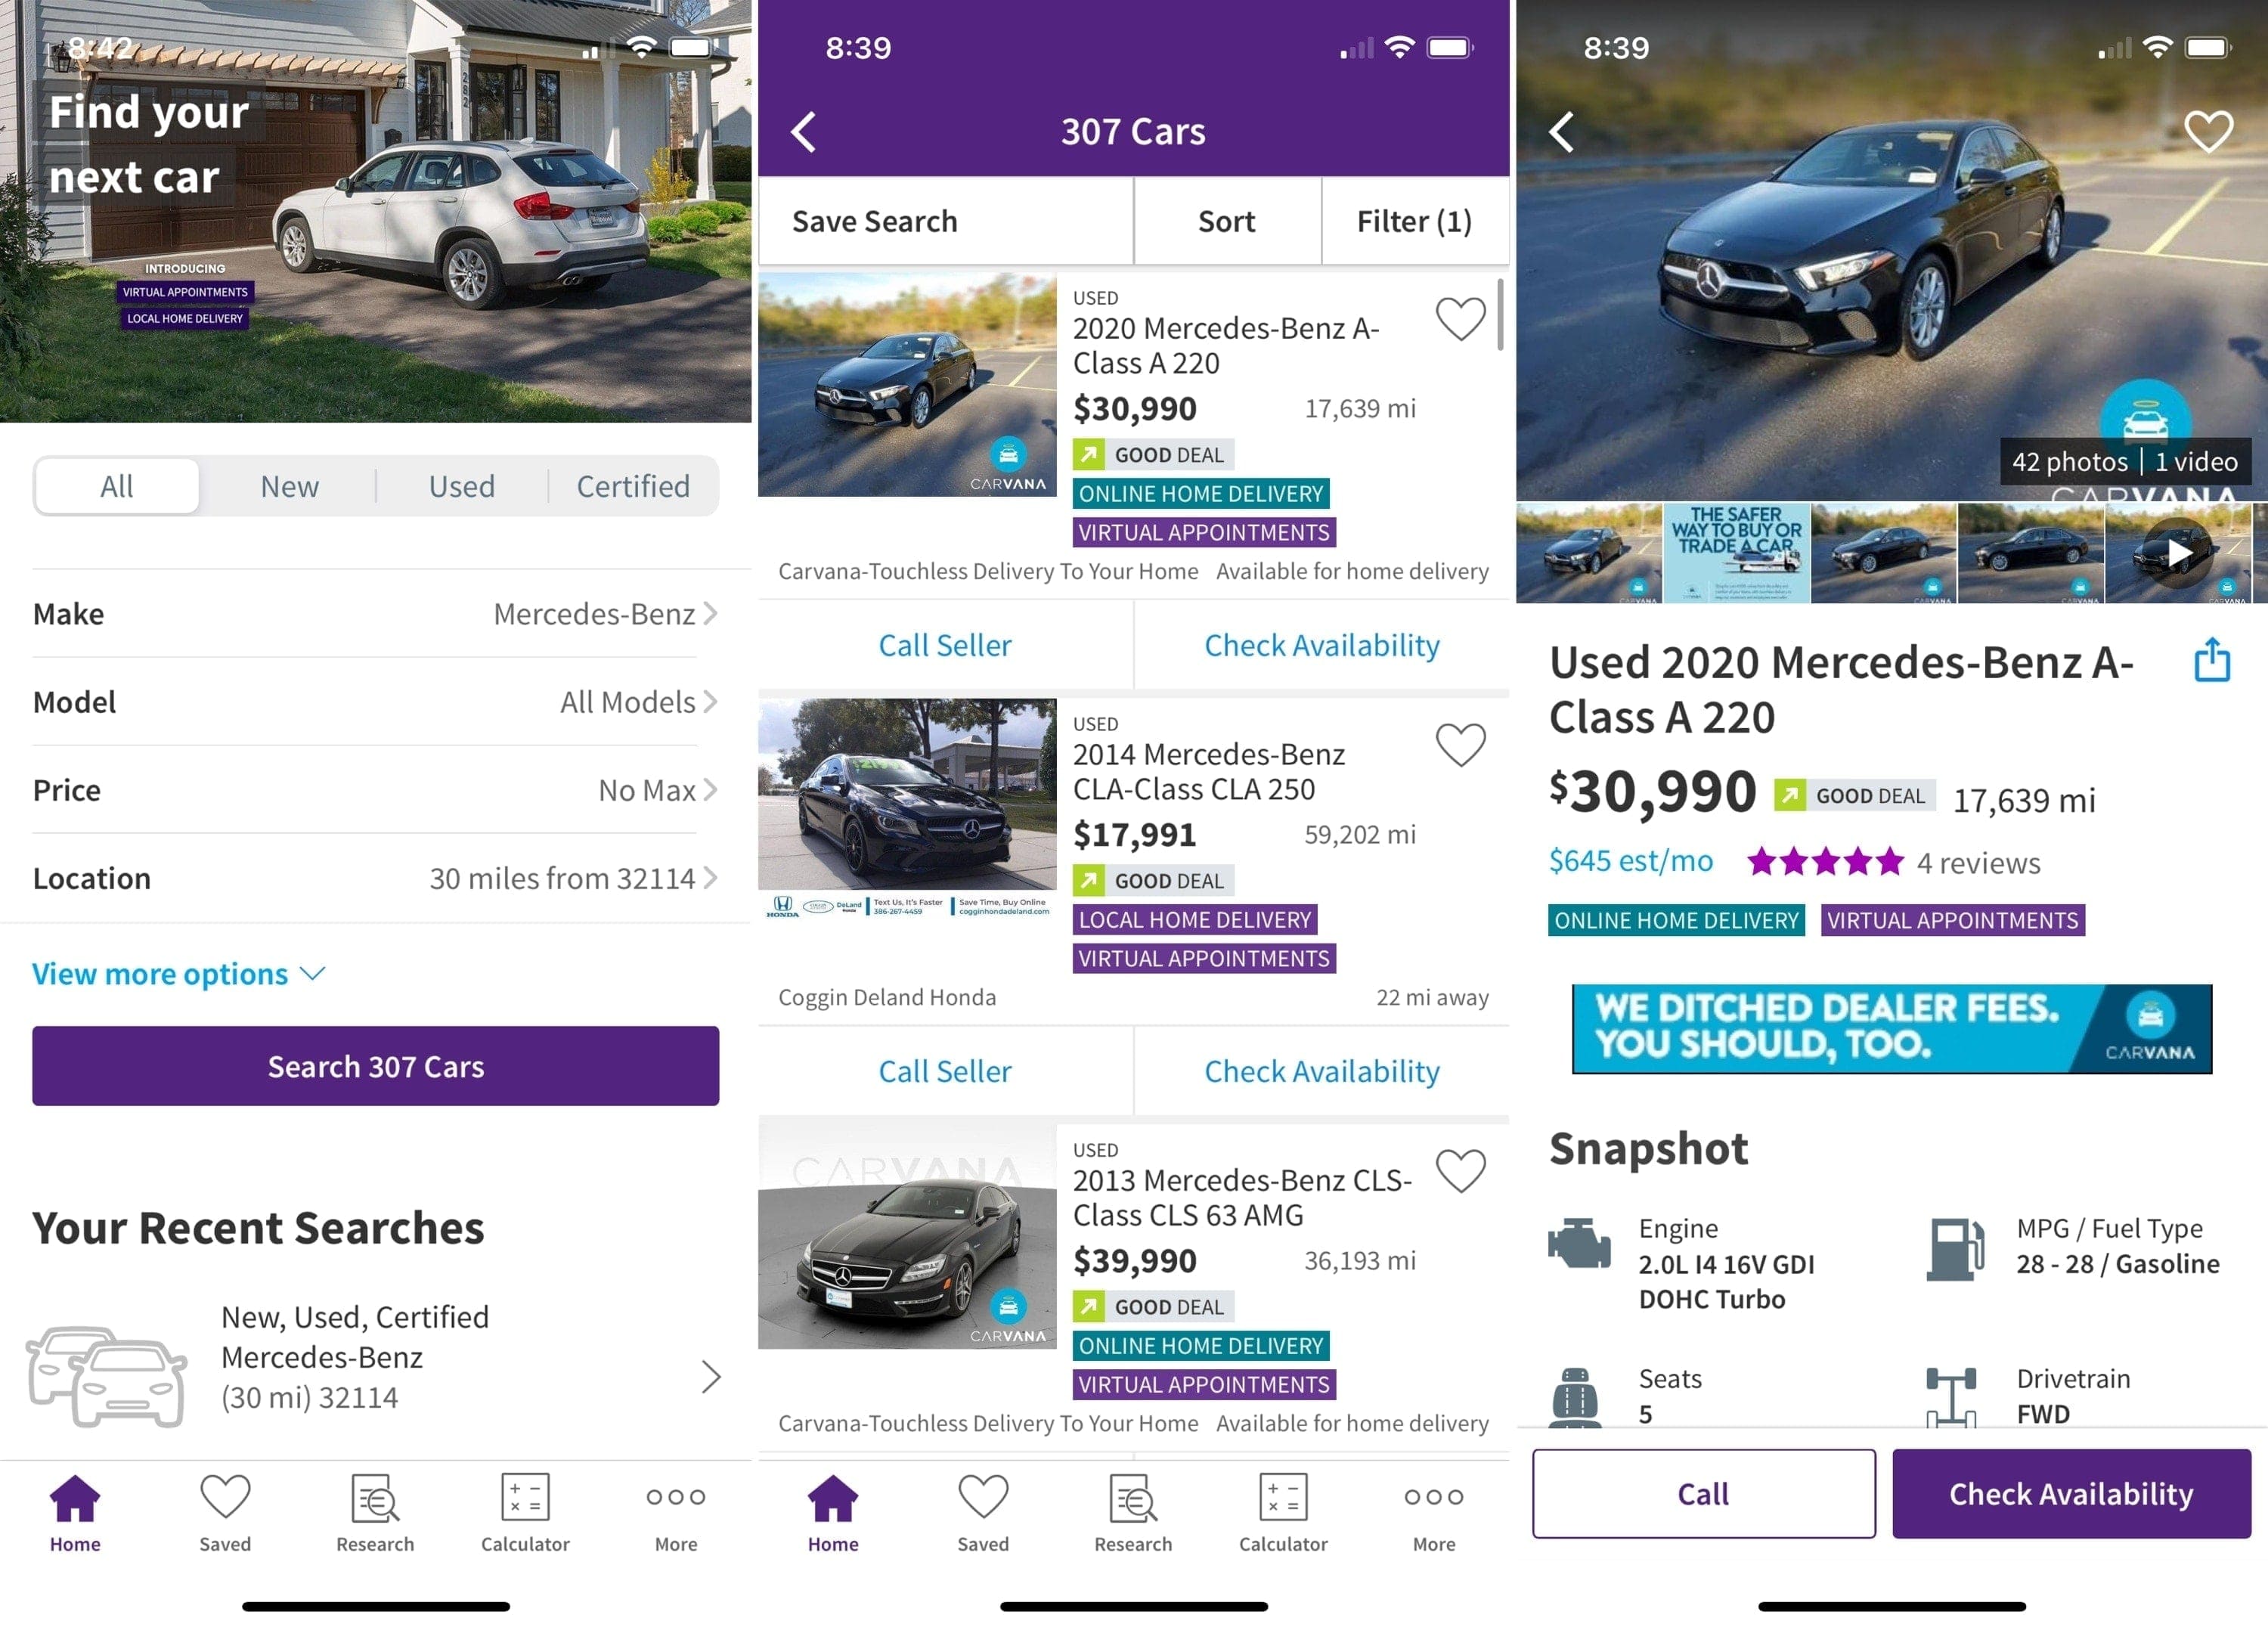 Apps for buying a car - CarsDotCom on iPhone